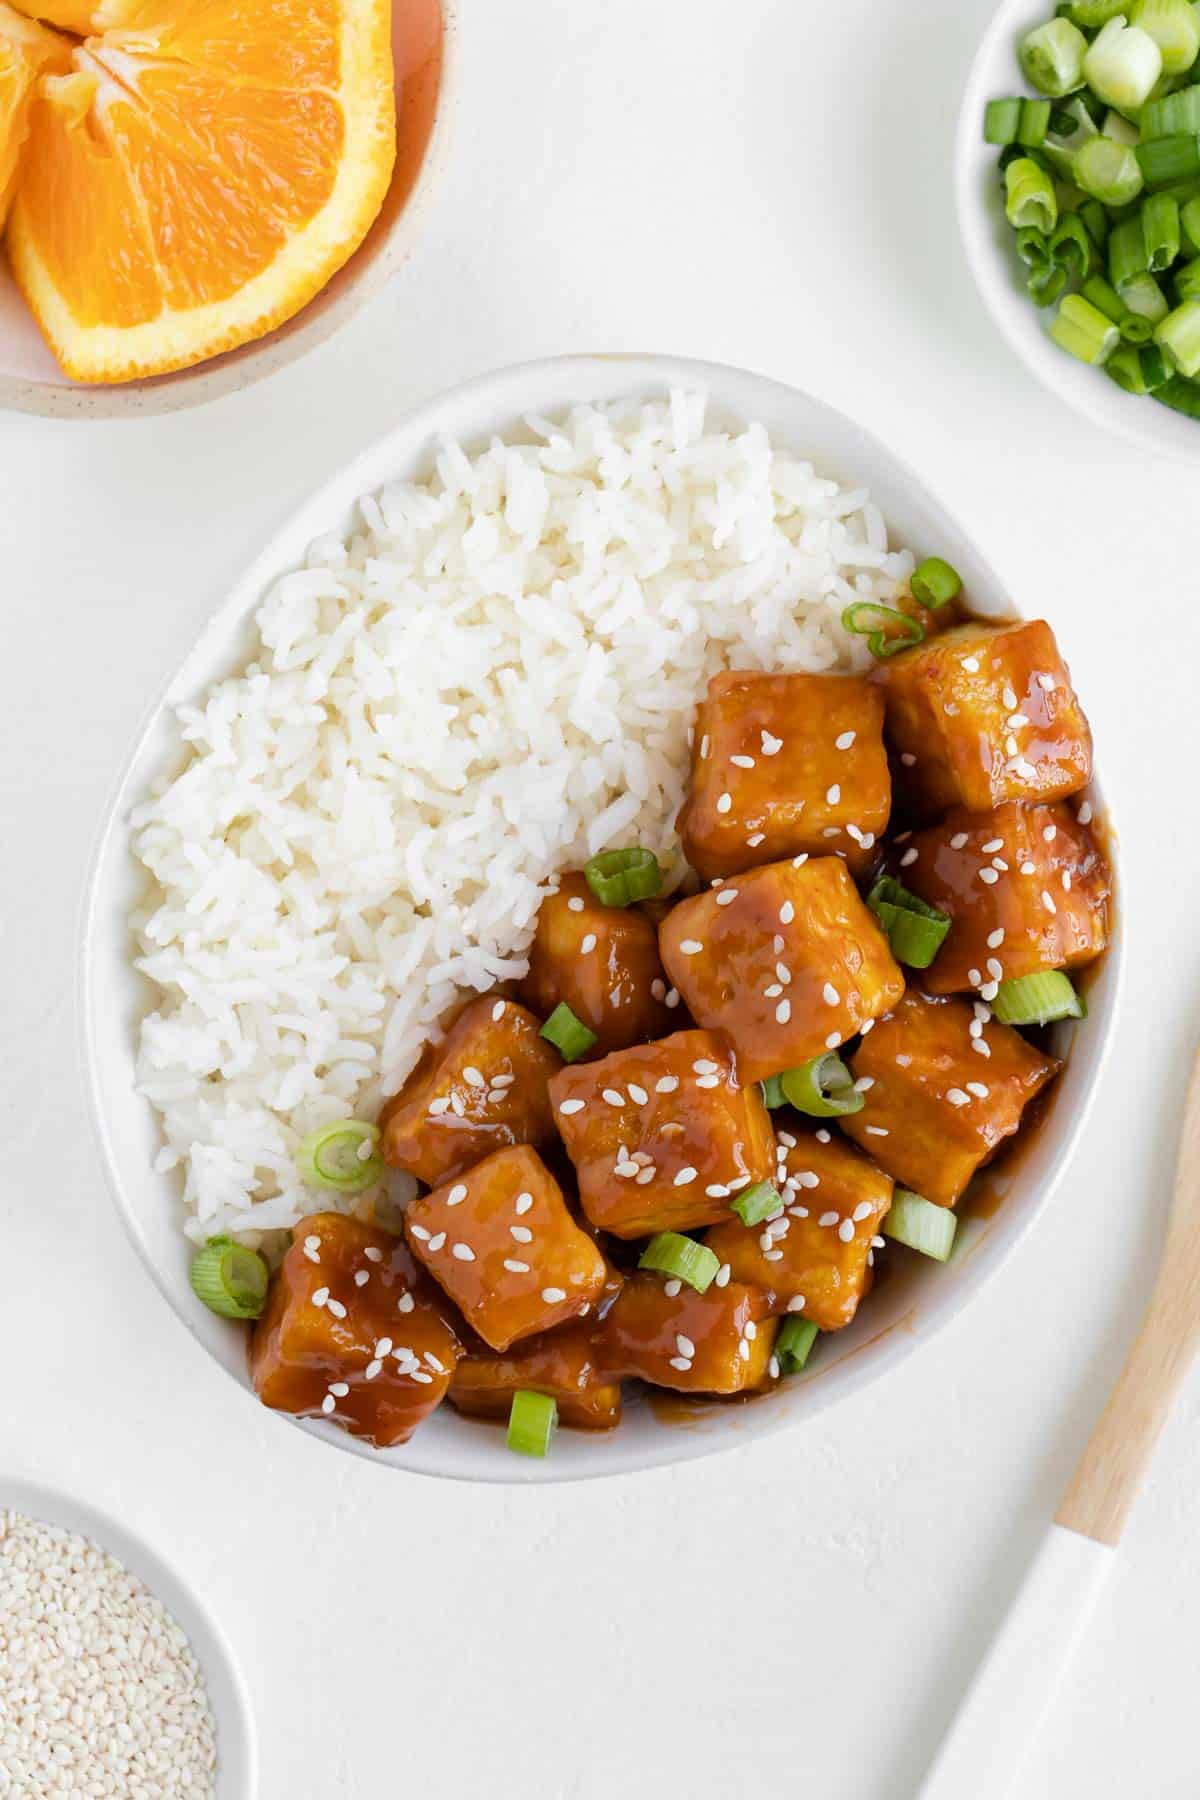 orange tofu in a bowl with white rice, surrounded by a plate of oranges, green onions, and sesame seeds